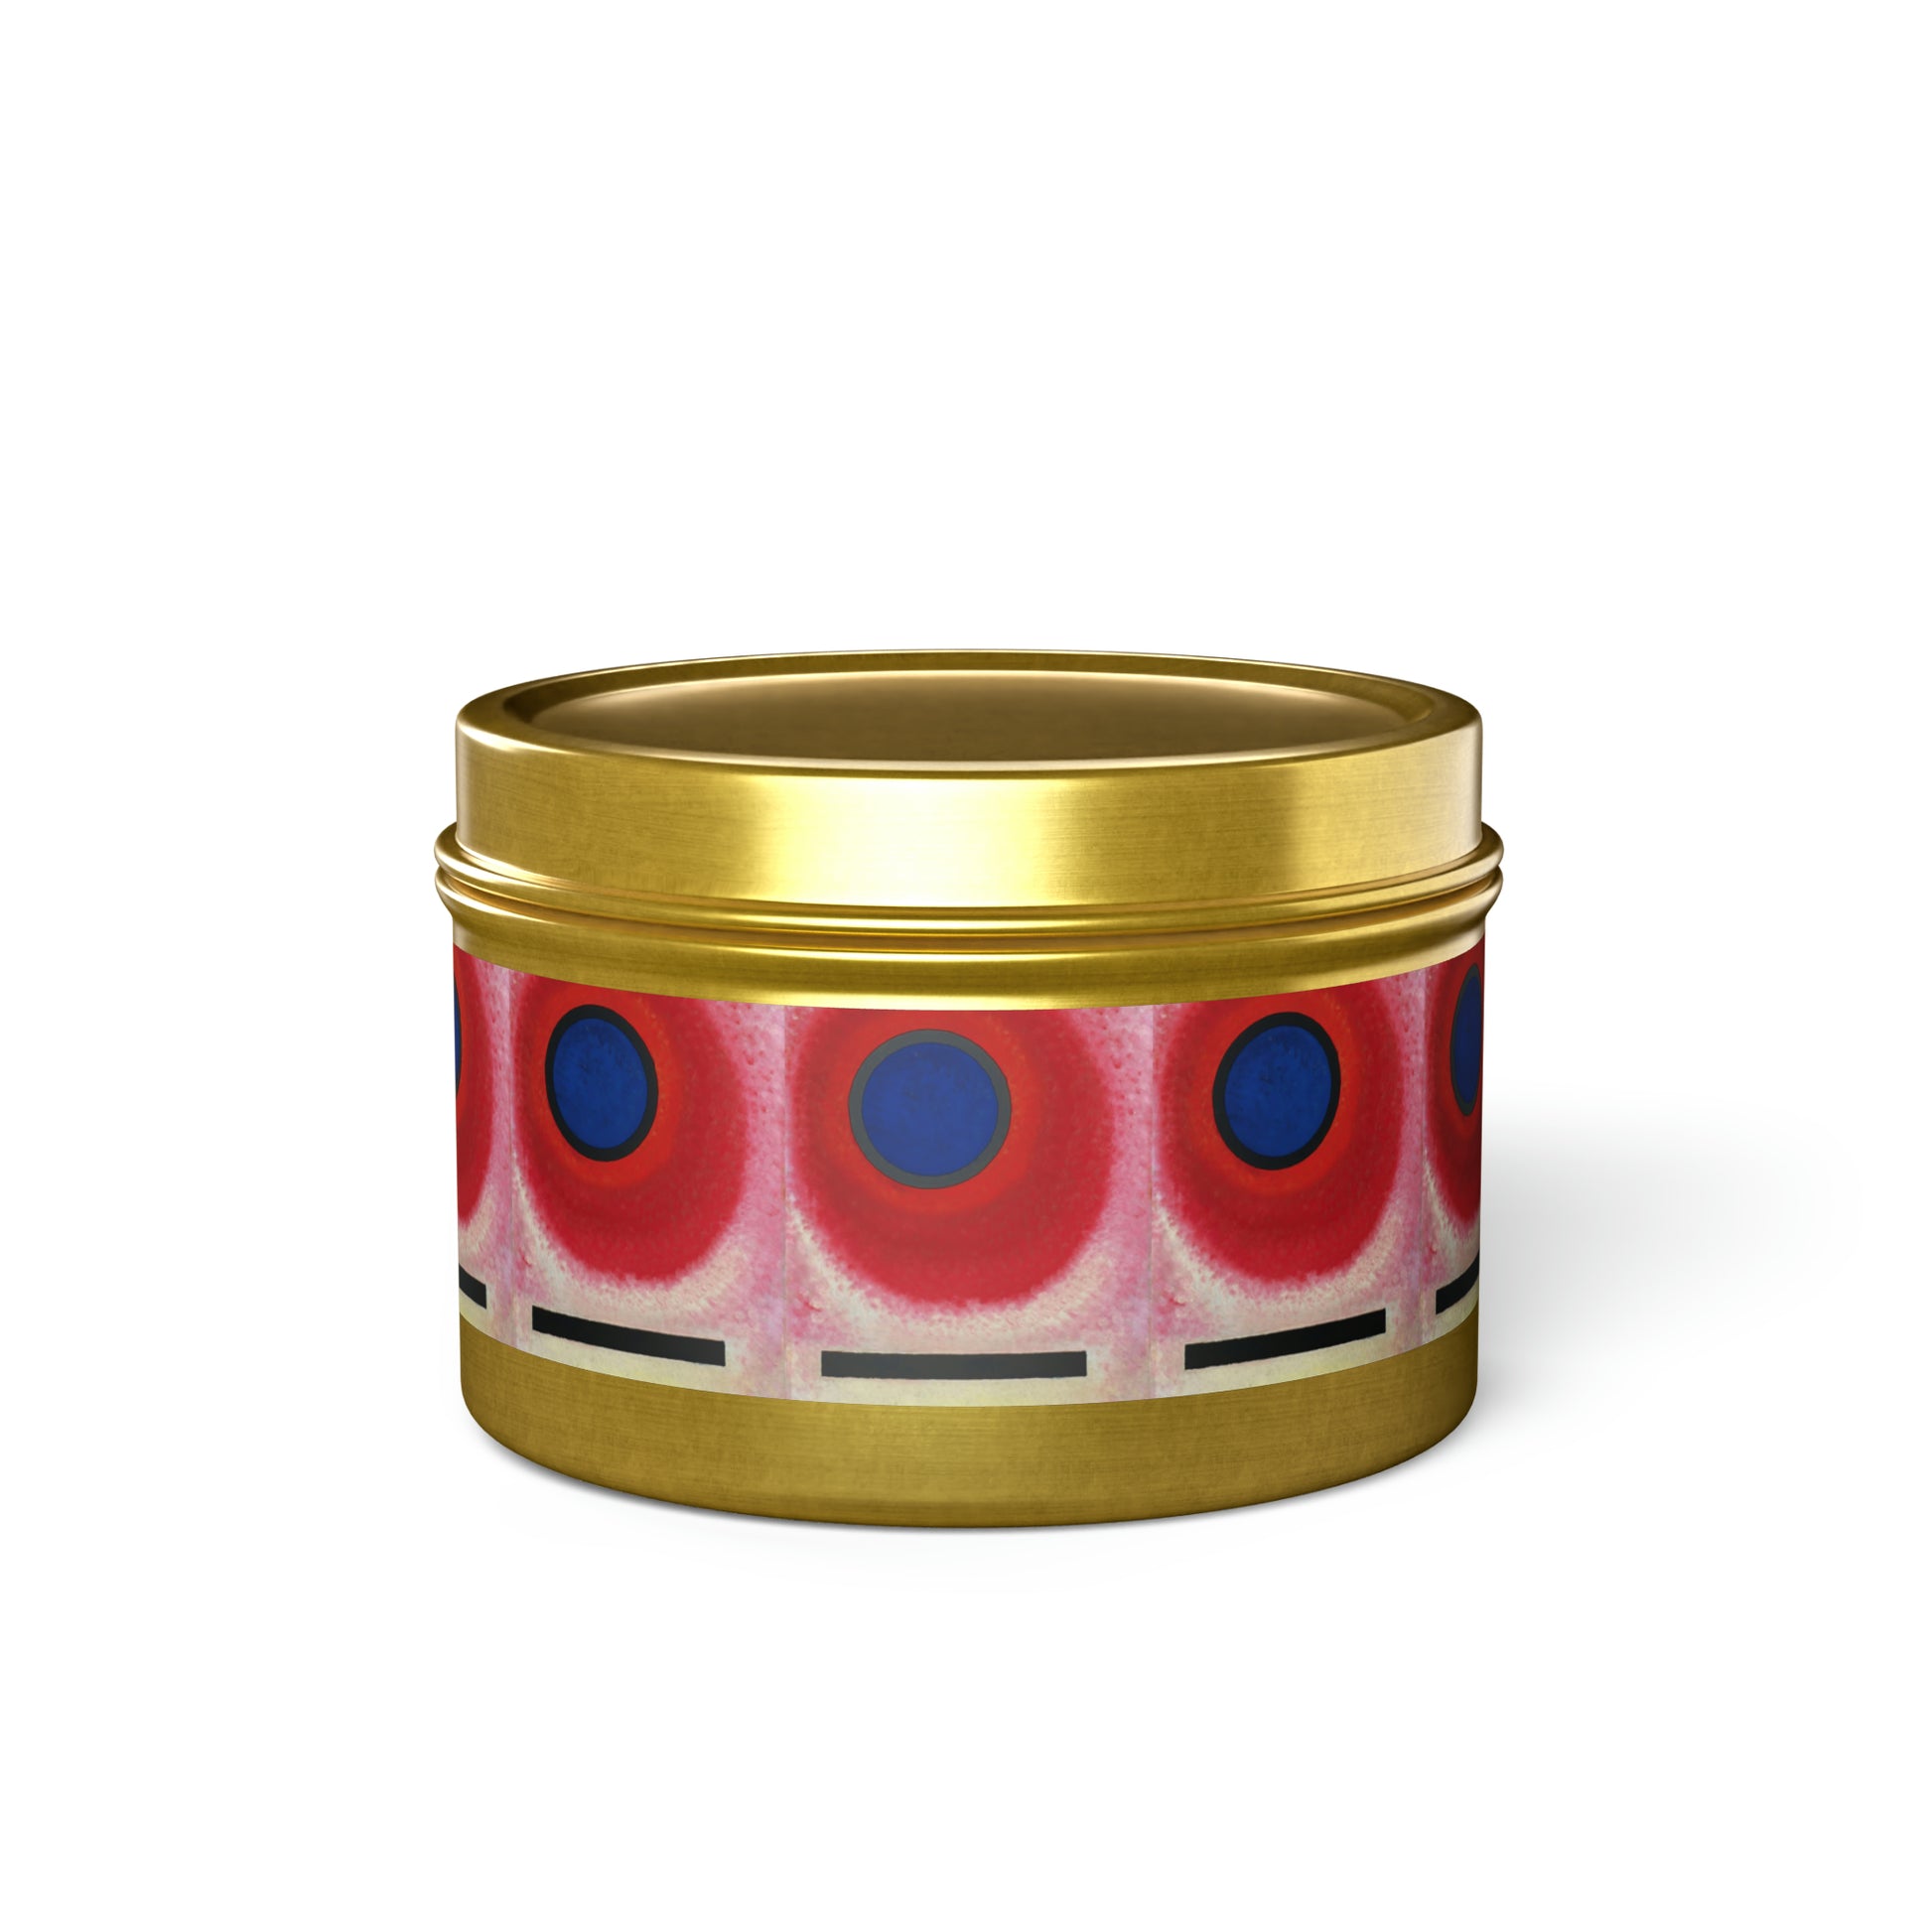 a gold tin with a red and blue design on it